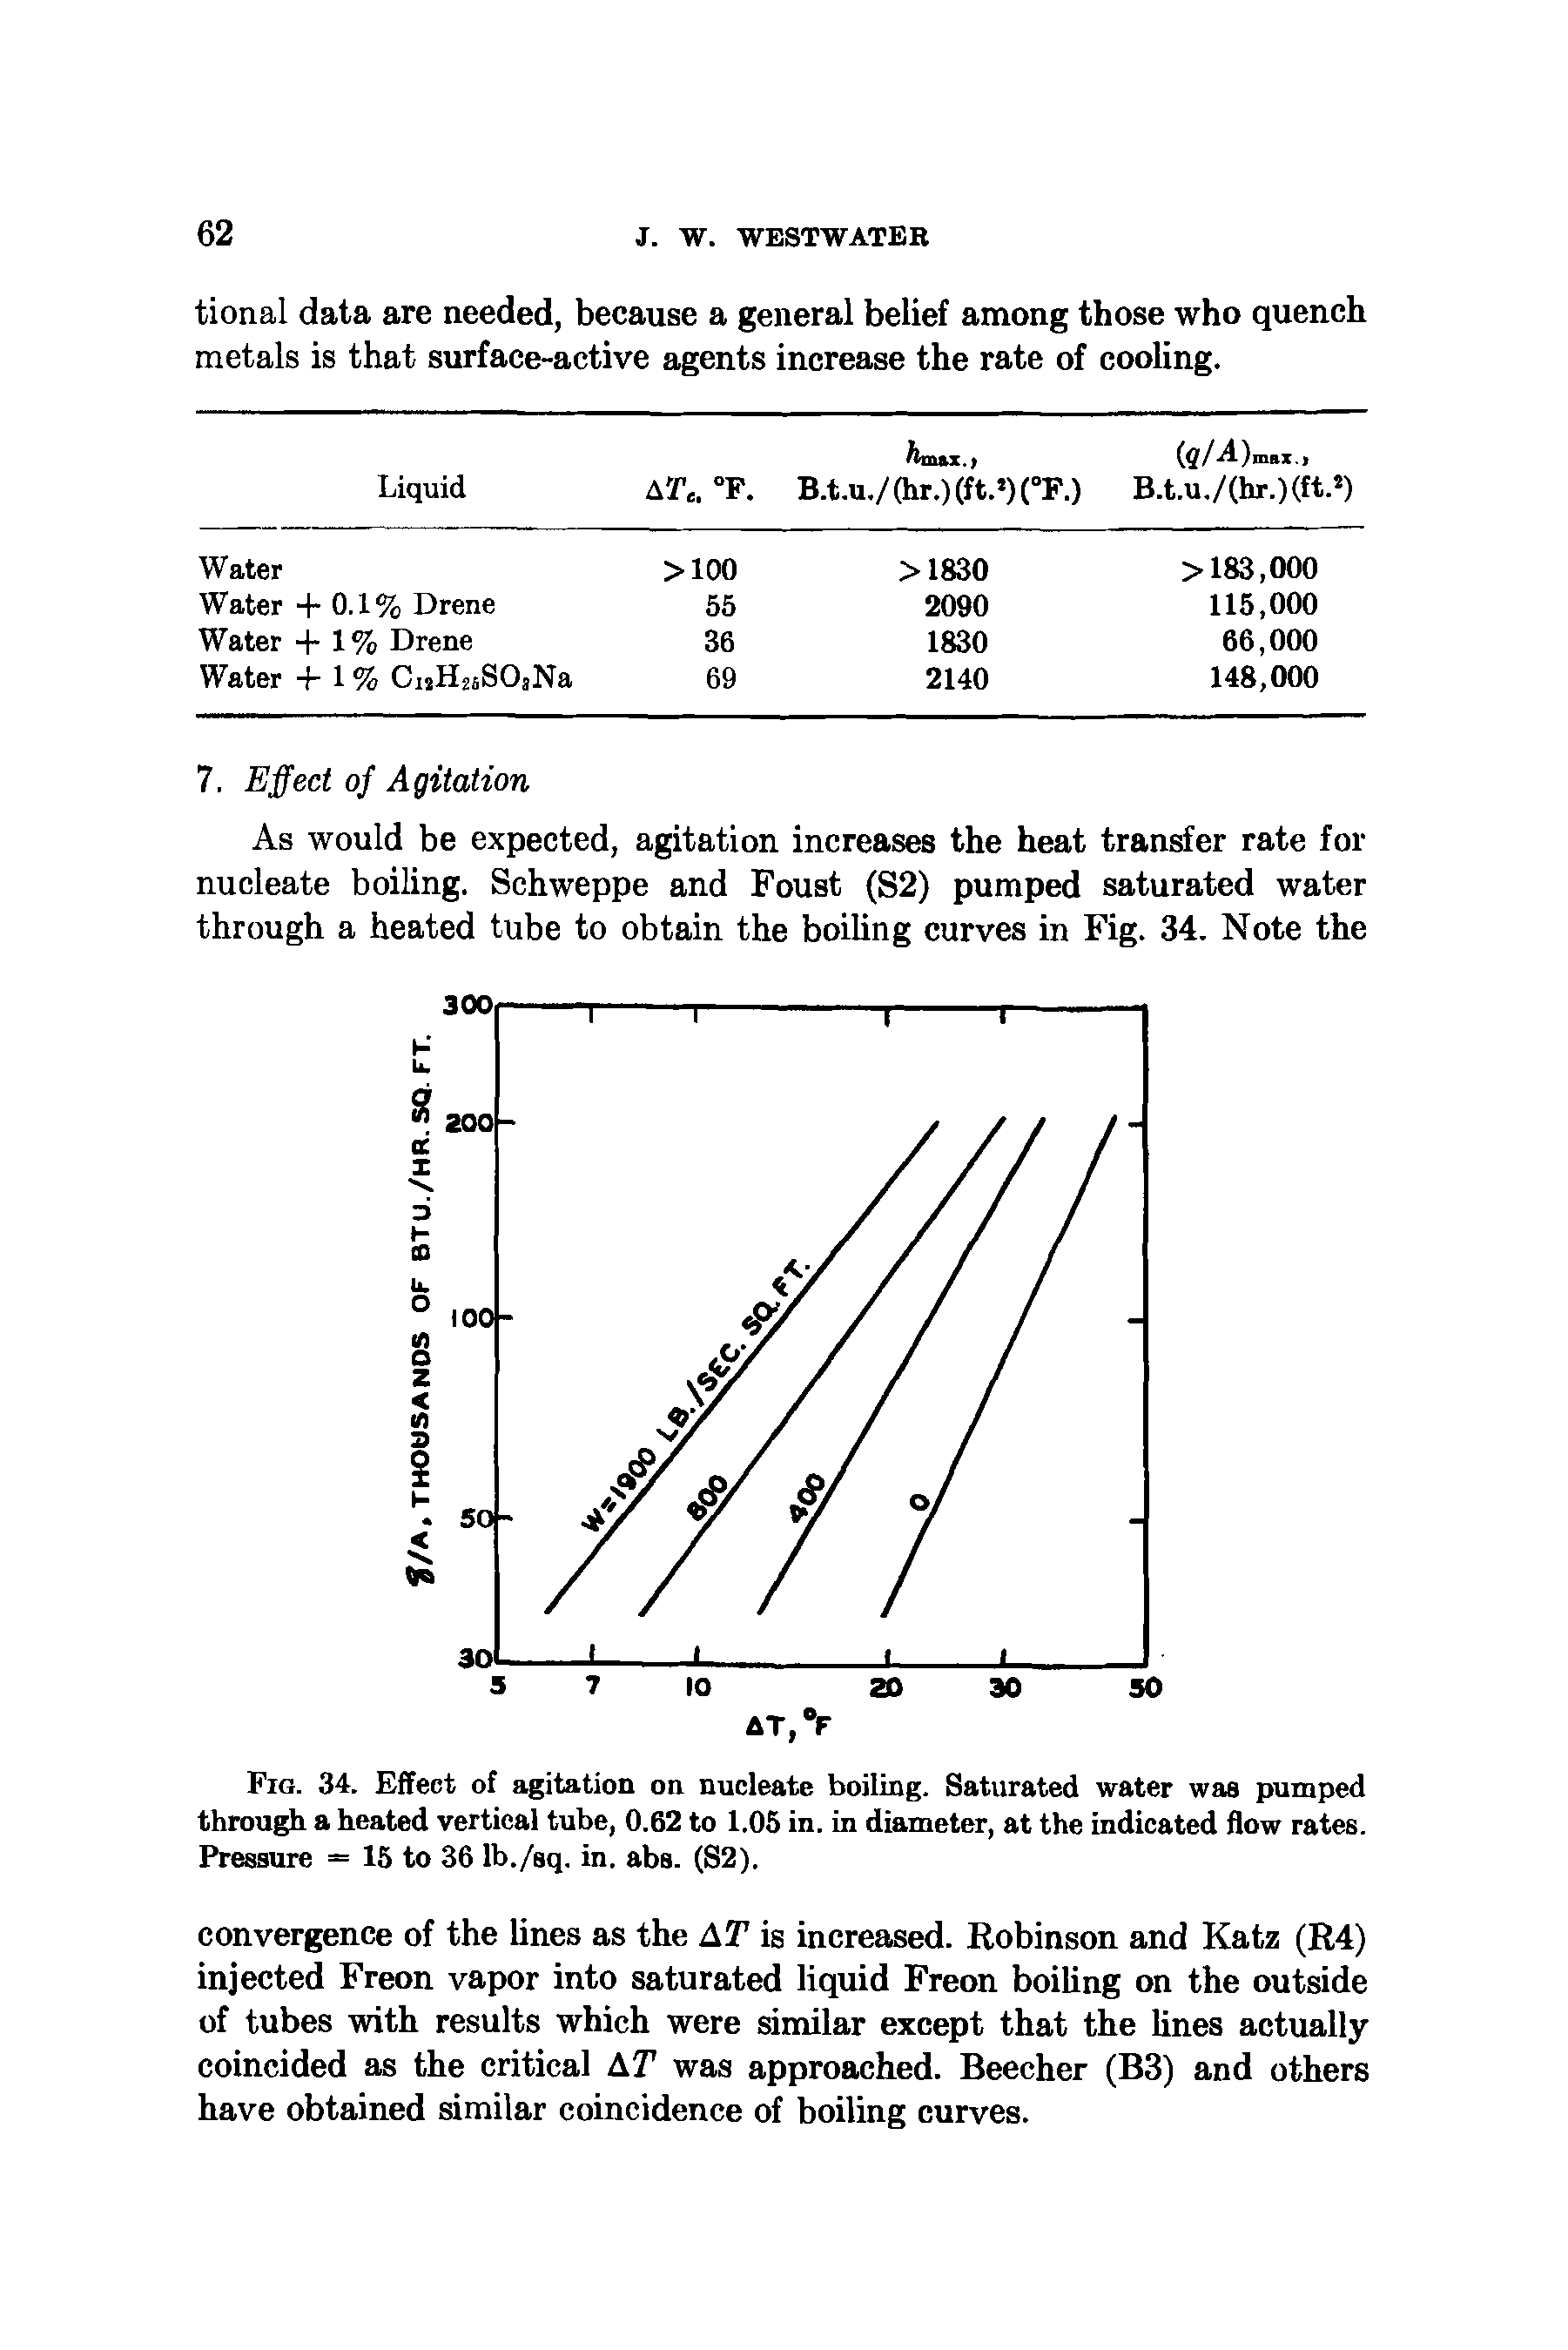 Fig. 34. Effect of agitation on nucleate boiling. Saturated water was pumped through a heated vertical tube, 0.62 to 1.05 in. in diameter, at the indicated flow rates. Pressure = 15 to 36 lb./sq. in. abs. (S2).